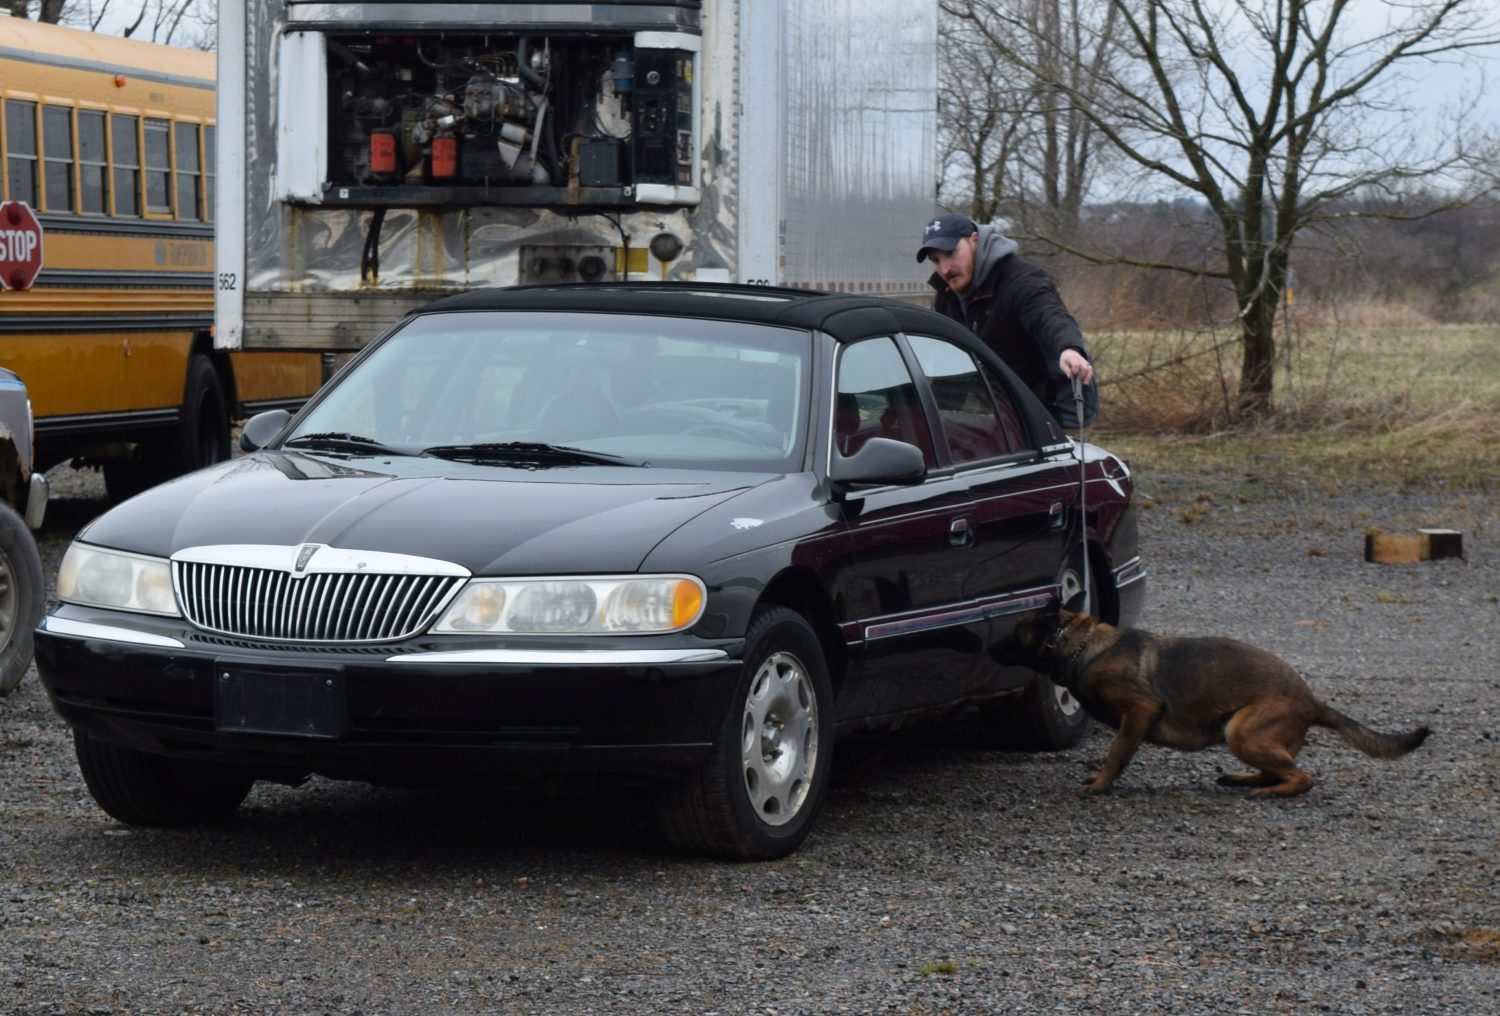 Marshfield Police Department K-9 Steffi and partner Officer Chris Hasz search for drugs in abandoned cars in a lot adjacent to Shaw’s Wrecking Yard on April 11.